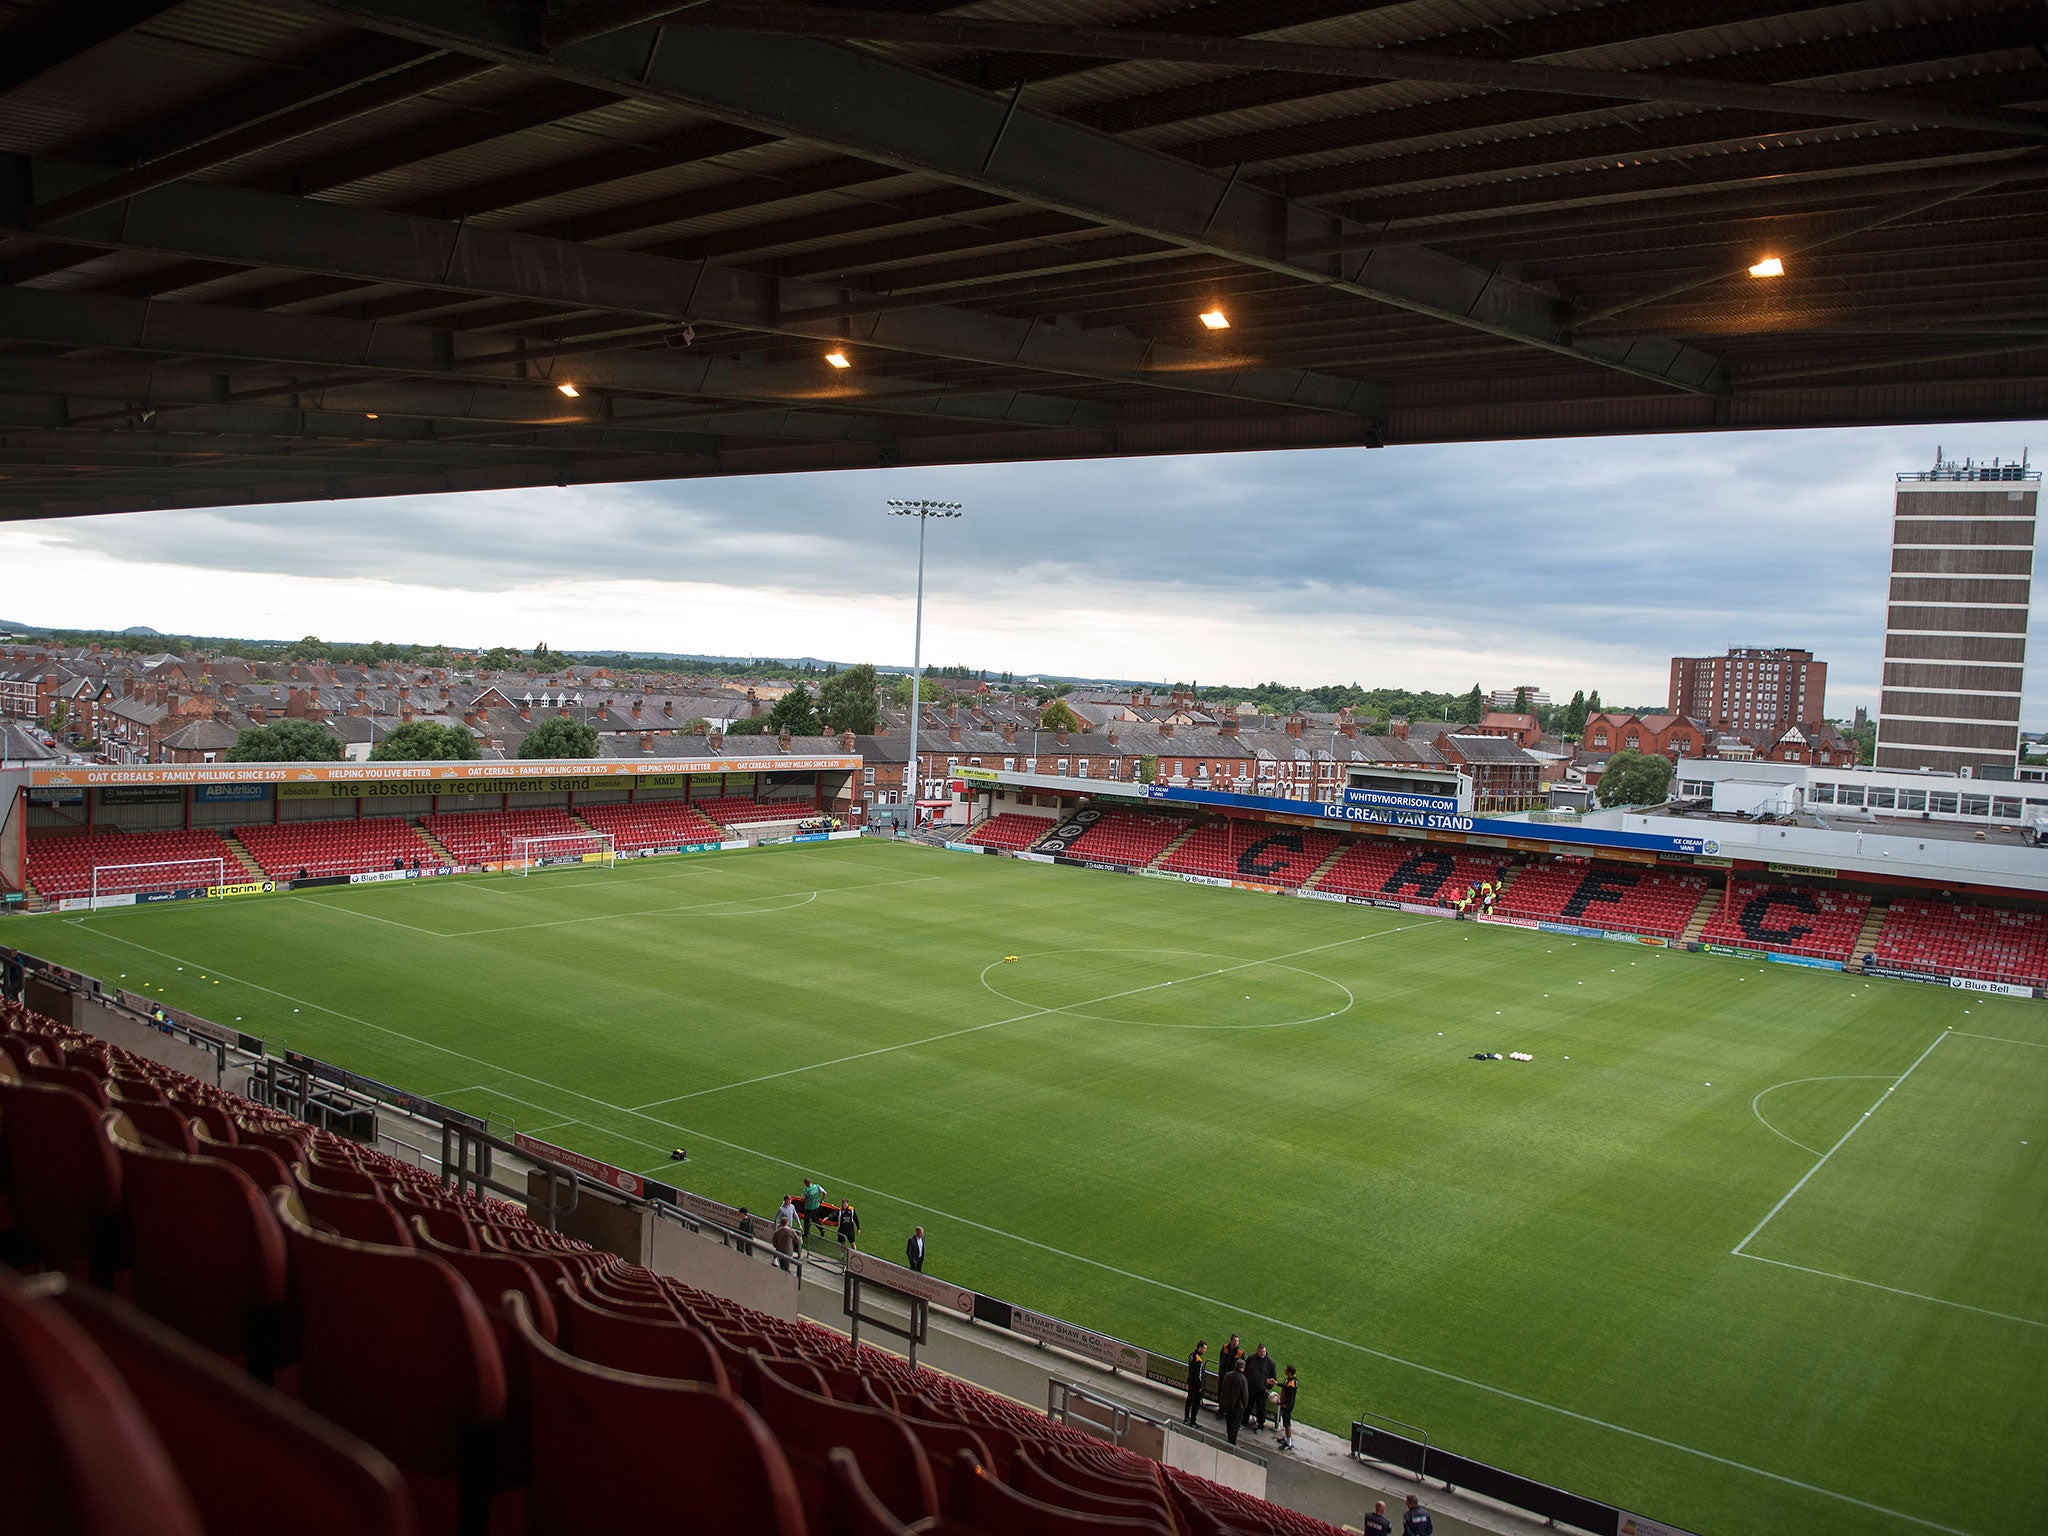 Crewe Alexandra was the first club to be implicated in this now-nationwide sexual abuse scandal